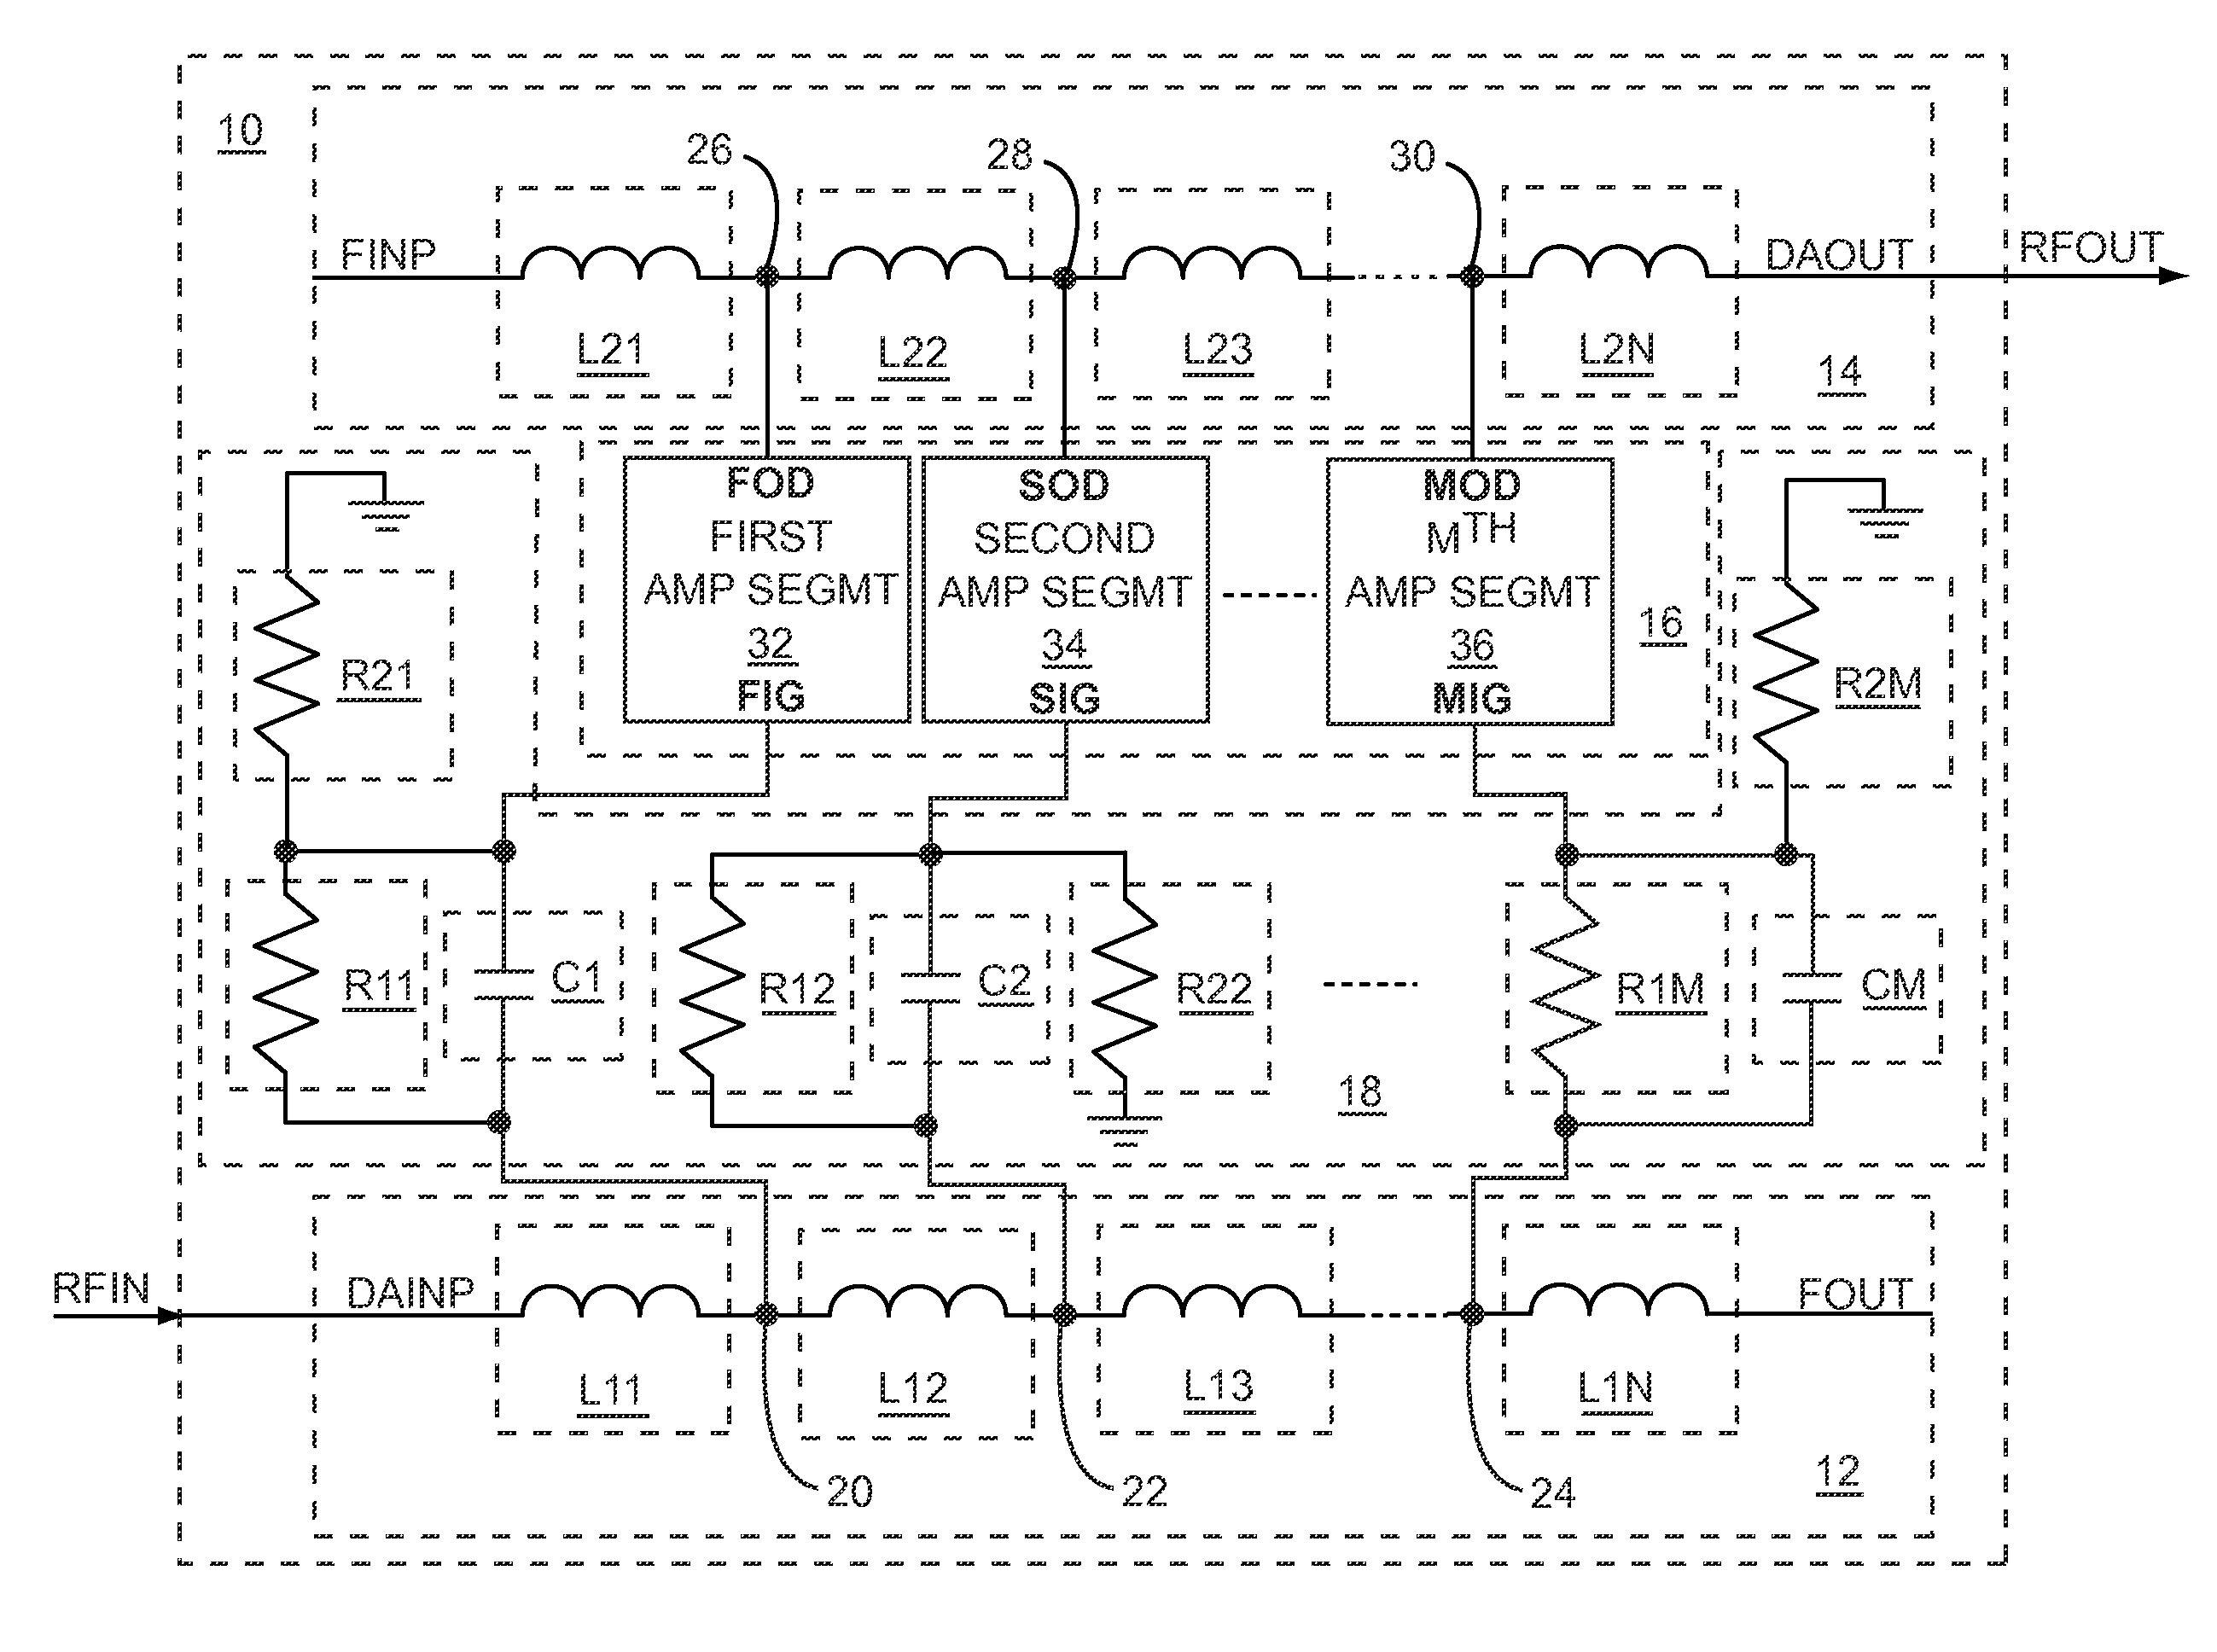 Capacitively-coupled distributed amplifier with baseband performance